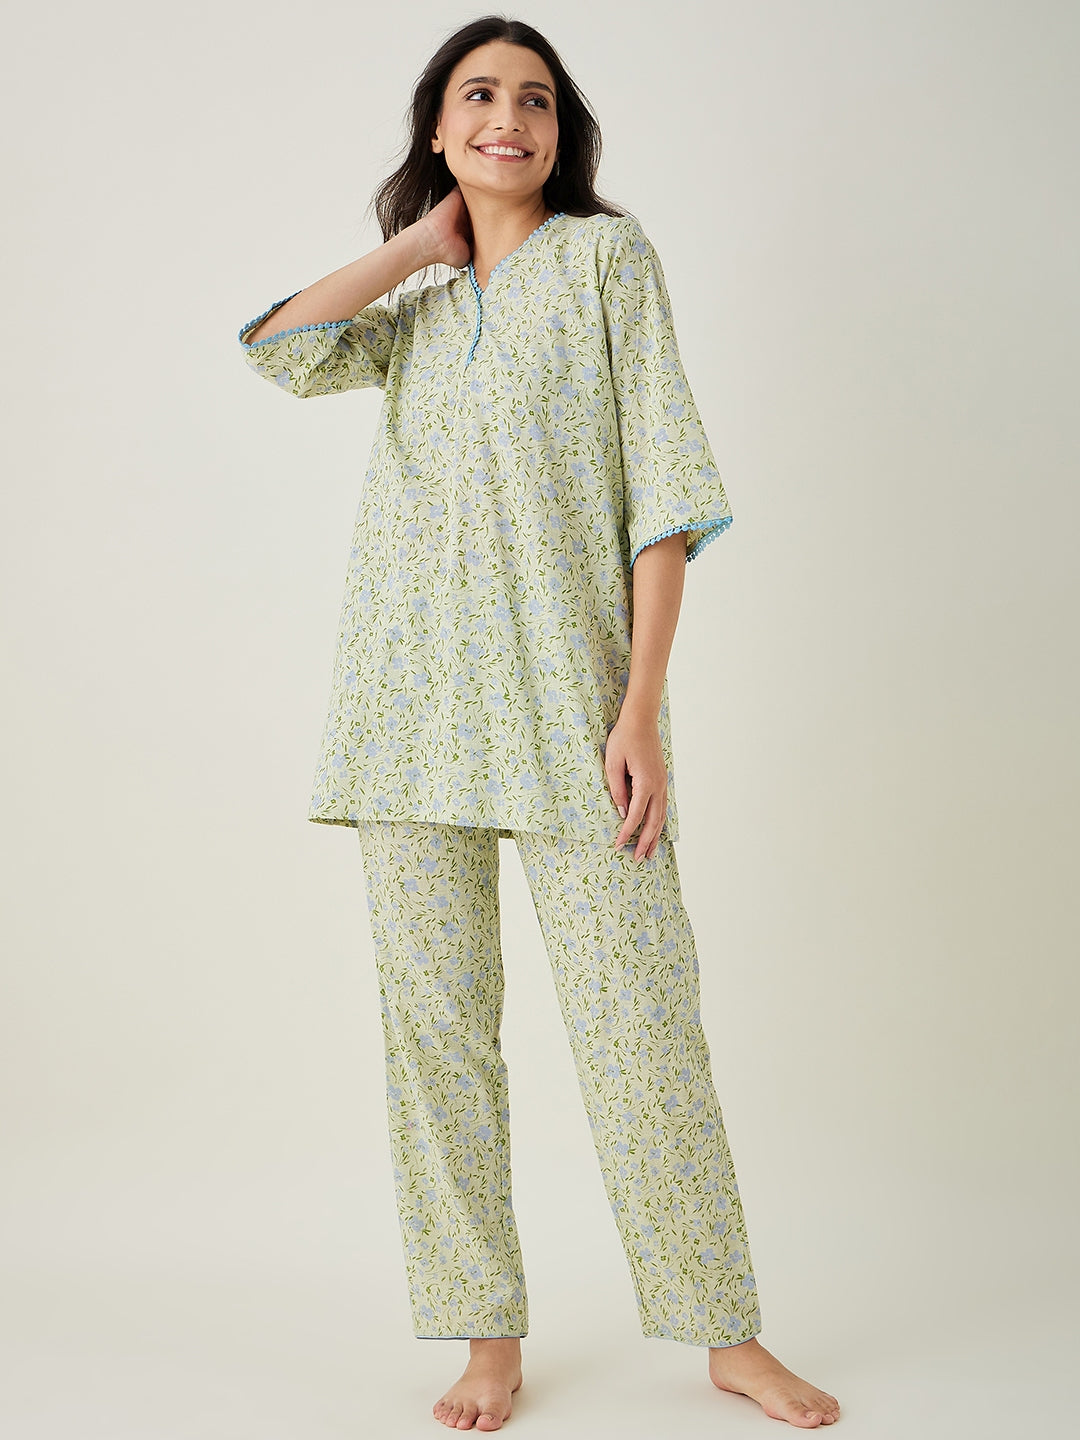 Women's Green Floral Printed Cotton Coord set - The Kaftan Company